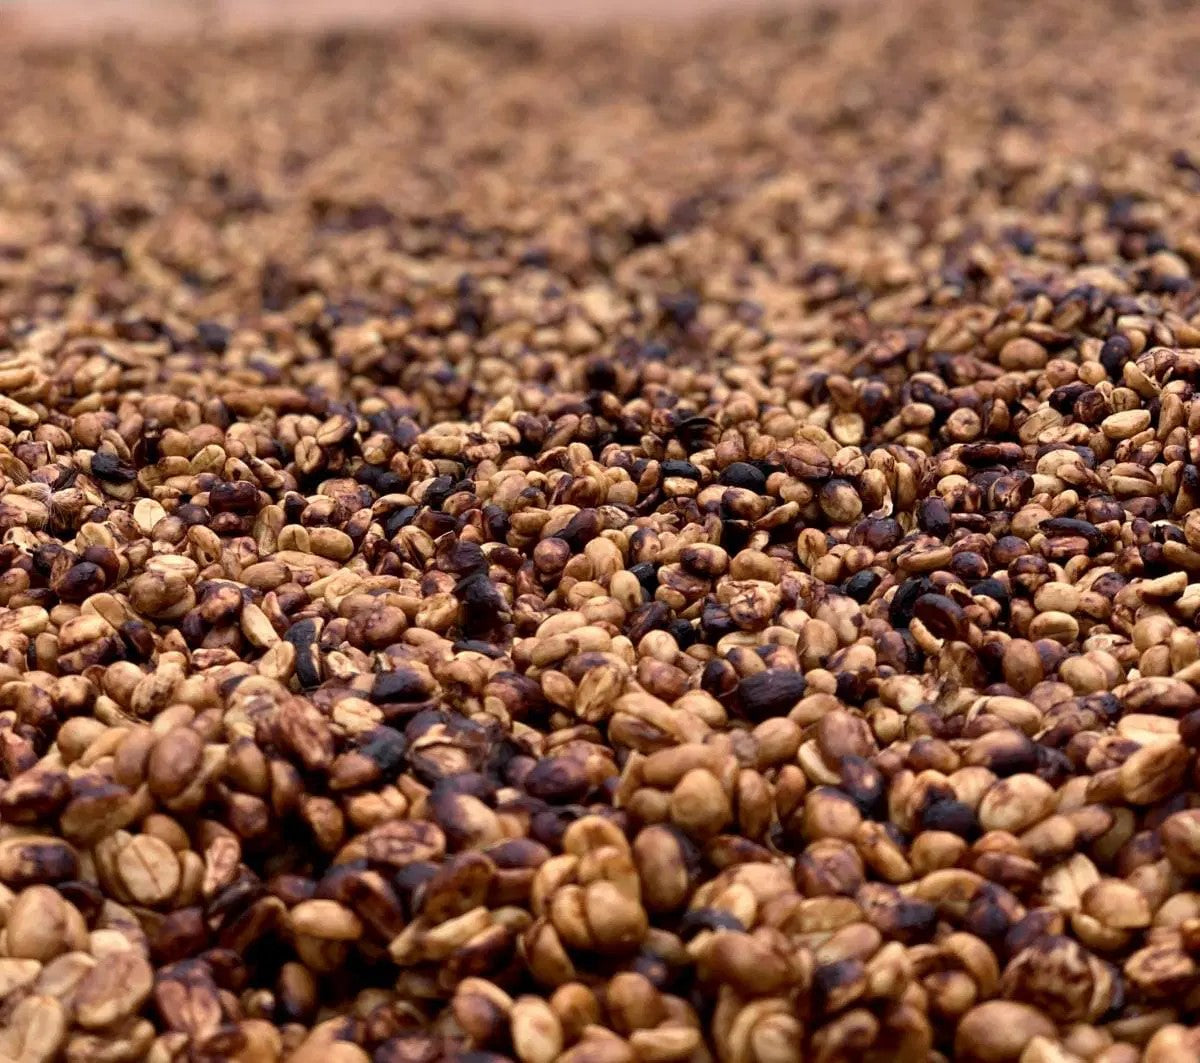 The pulped natural coffee bean processing method